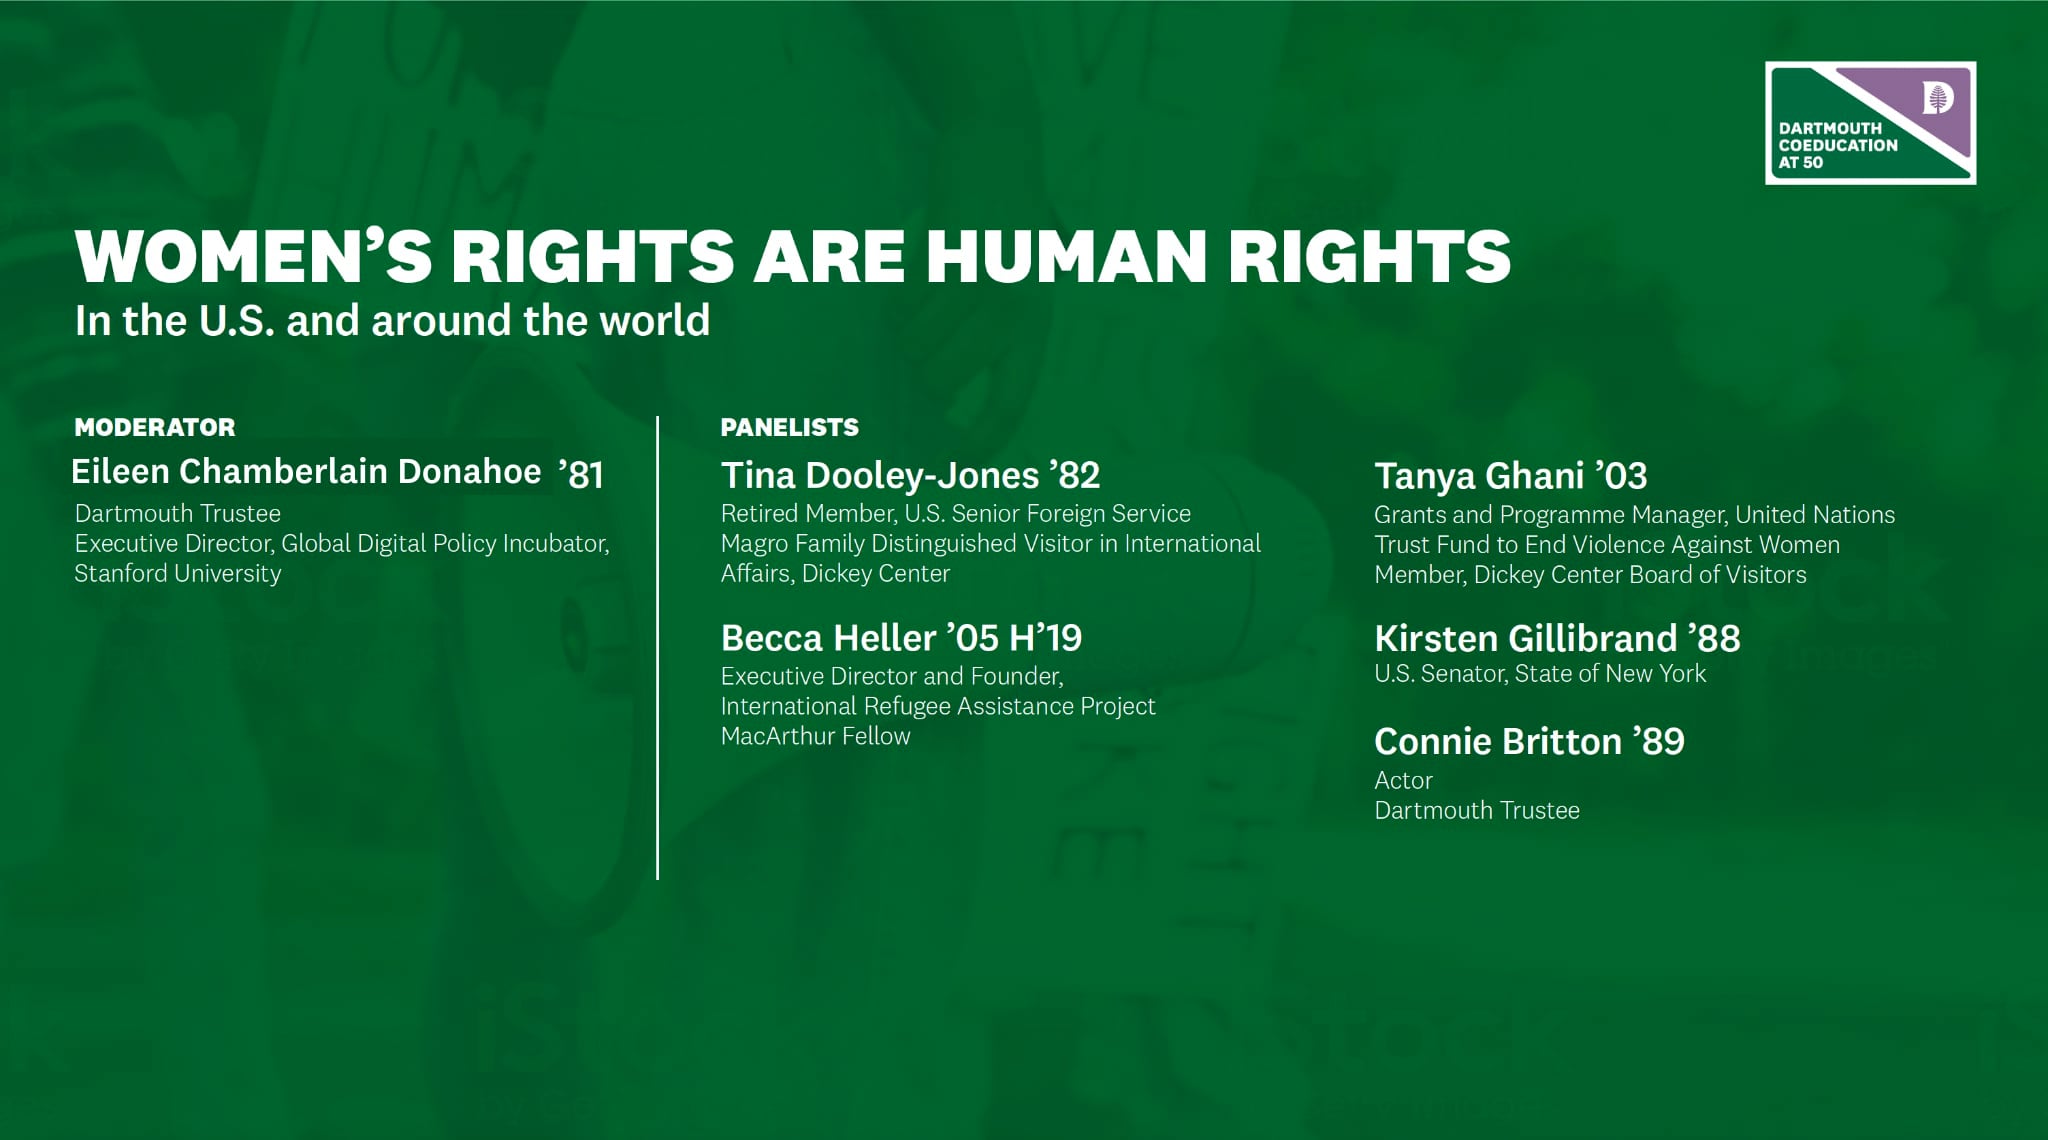 Women's Rights are human rights program thumbnail.